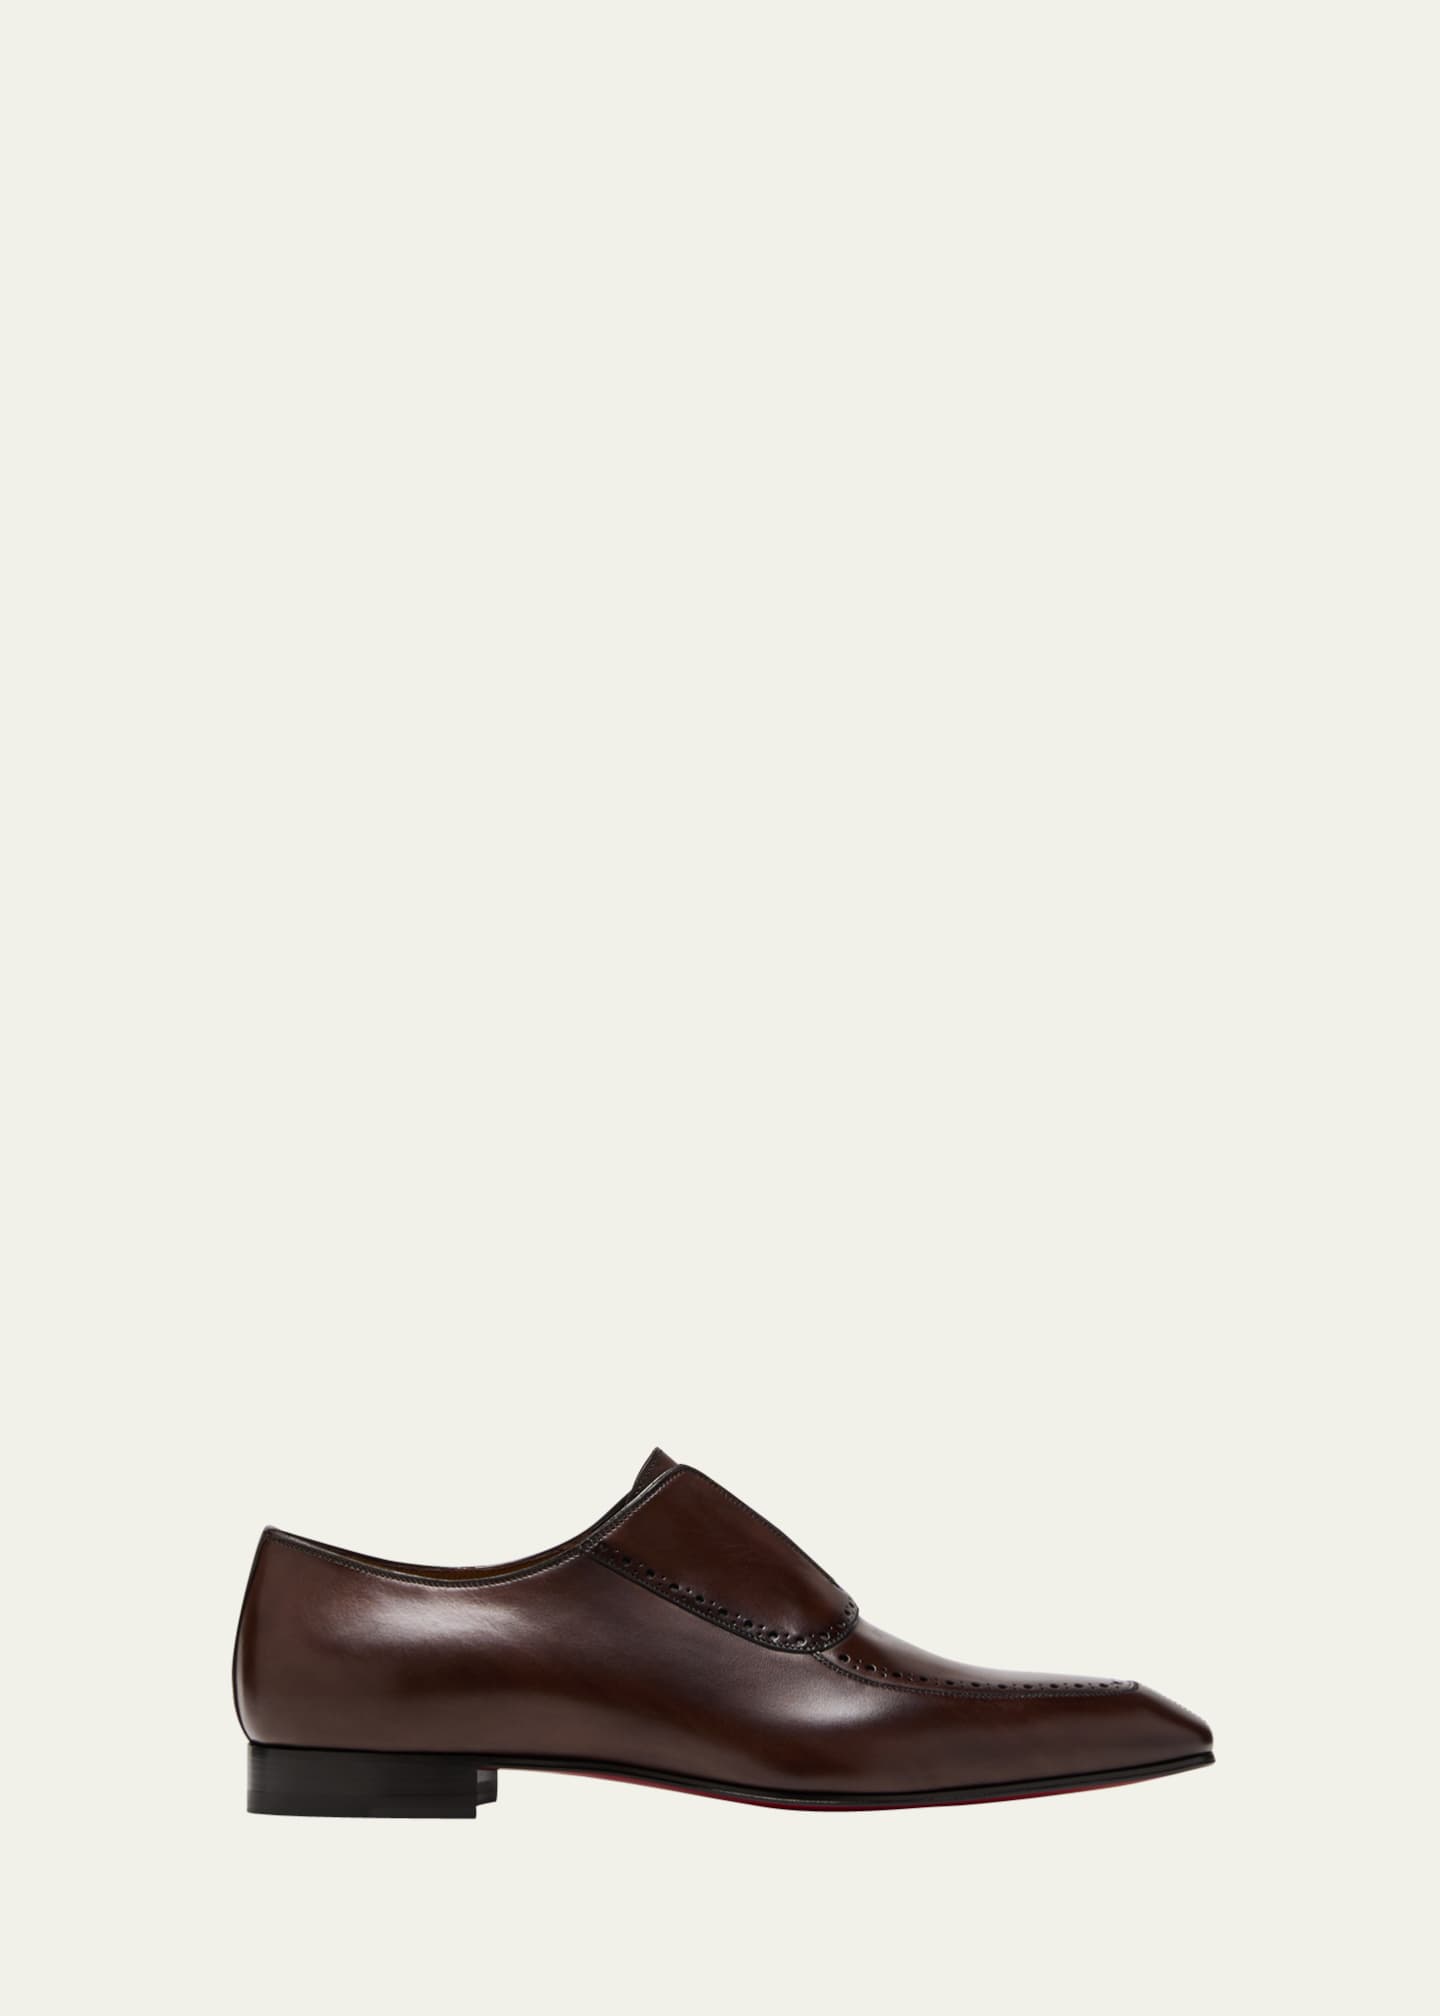 Christian Louboutin Men's Lafitte On Flat Leather Loafers - Bergdorf ...